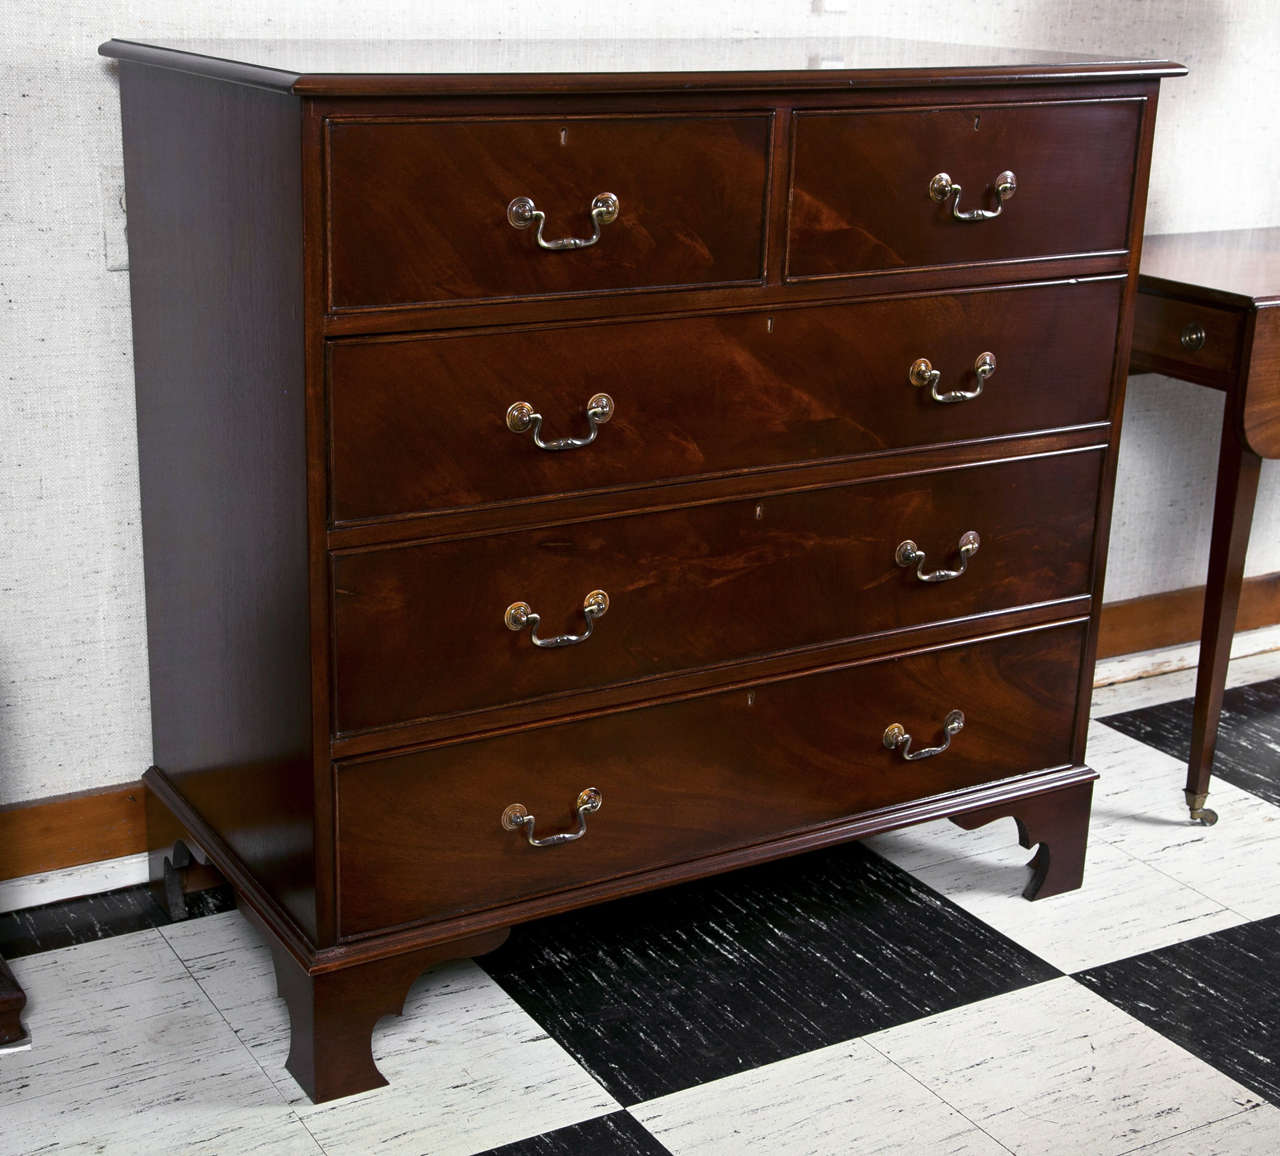 This Classic five-drawer chest has all the proper elements one seeks in such a piece. From the beaded drawers to the shaped bracket feet and including the brass bail hardware, it ticks off all the boxes. With beautiful crotch mahogany covering the